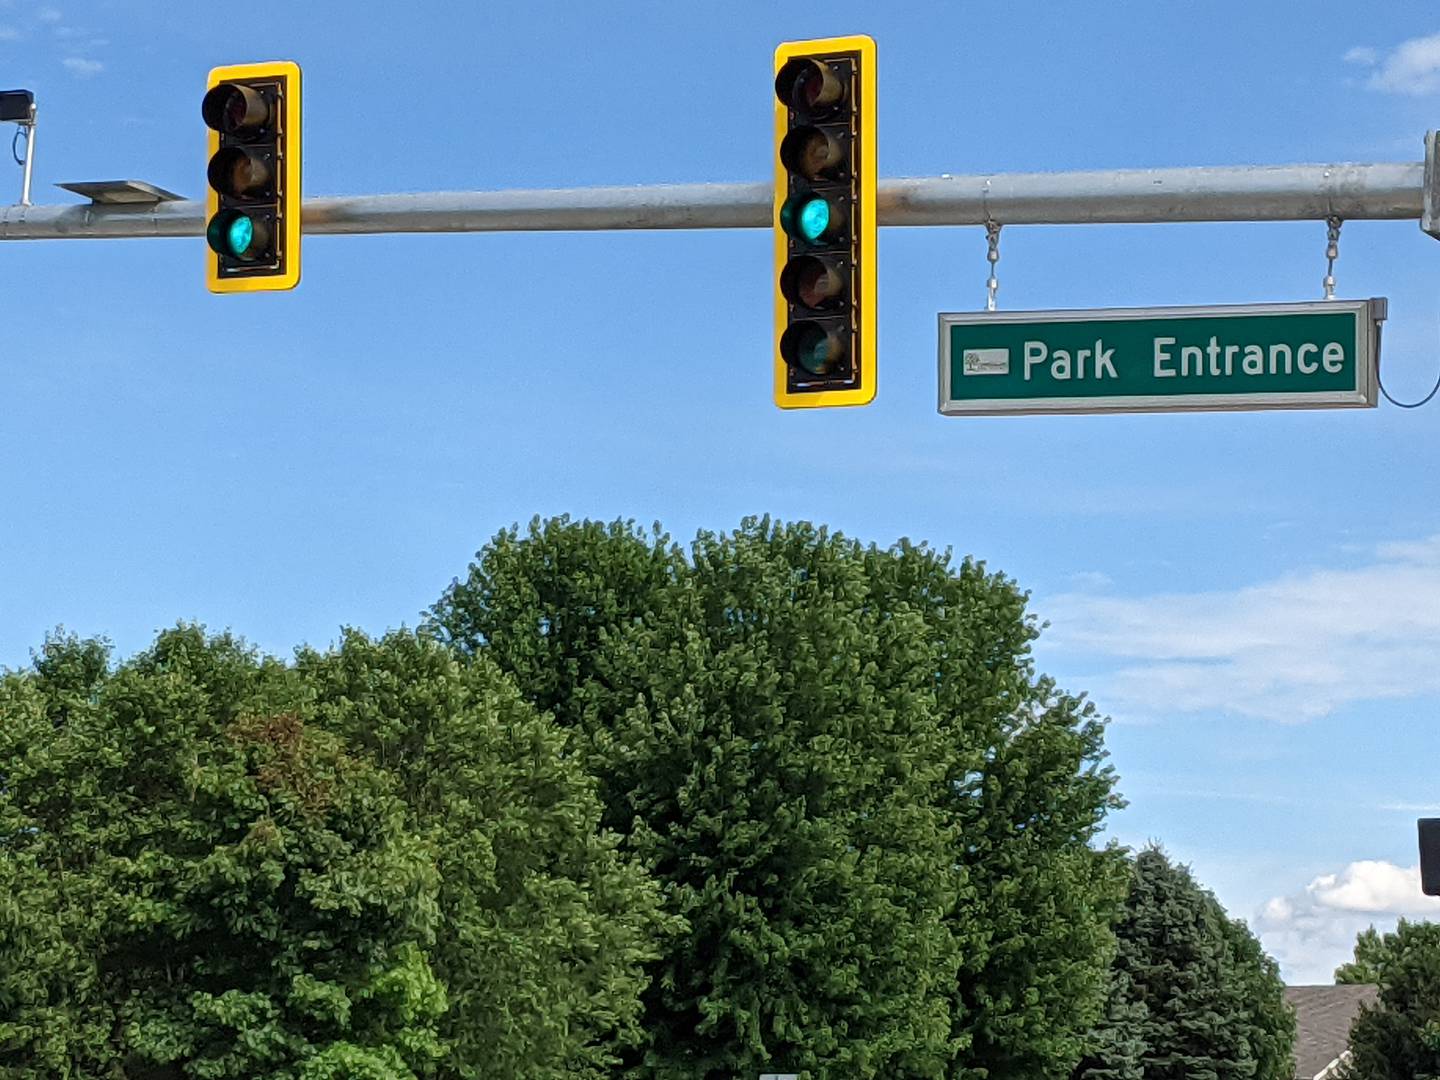 Traffic lights at the increasingly busy intersection of Plainfield and Woolley roads in Oswego were activated on July 3.